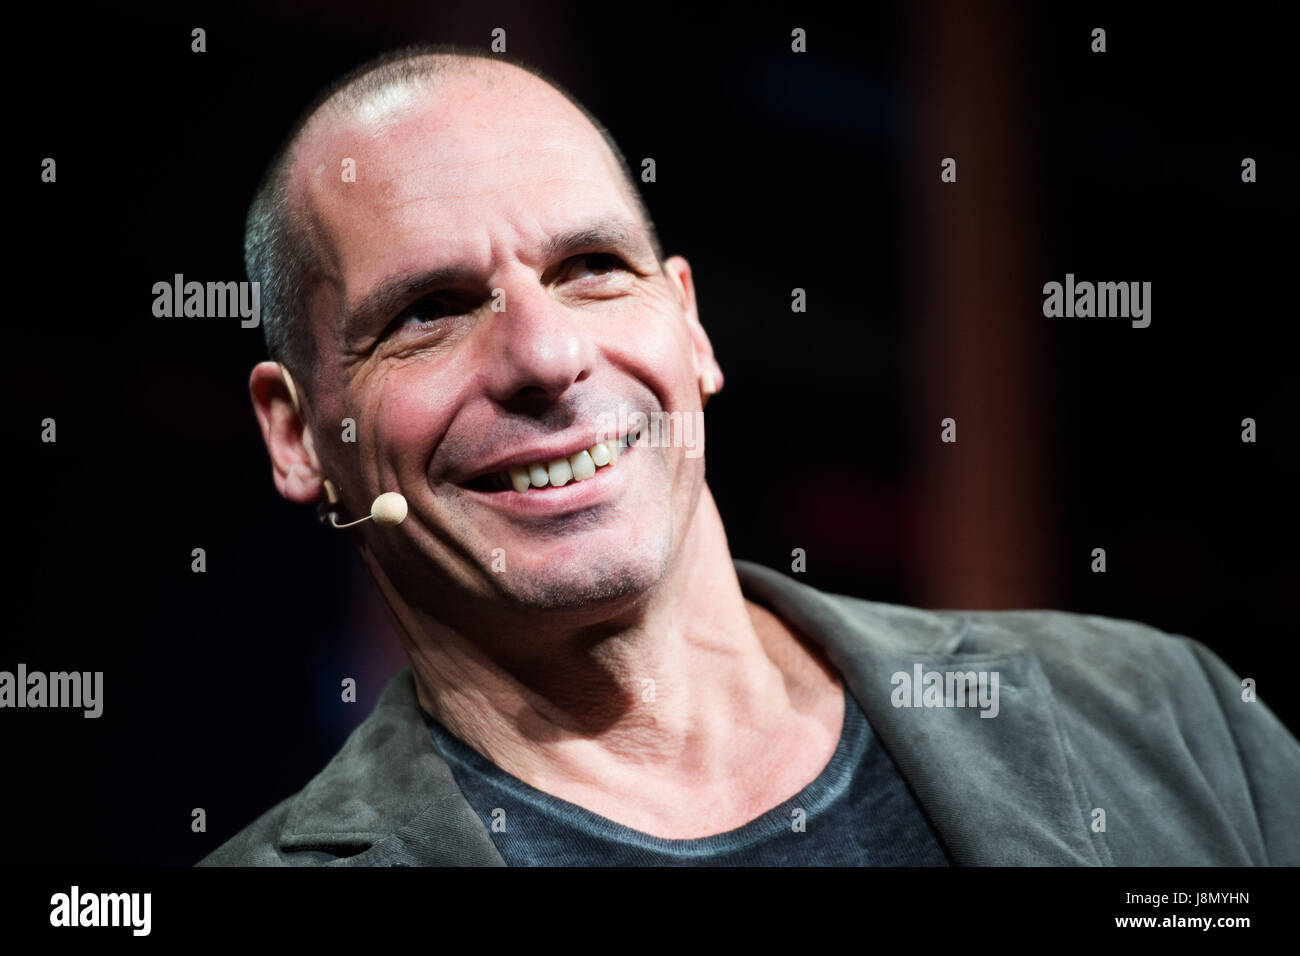 Hay Festival, Wales UK, Monday 29 May 2017 YANIS VAROUFAKIS, former Finance Minister of Greece, talking about 'brinkmanship, hypocrisy colluson and betrayal' during the Greek Euro crisis, at the 2017 Hay Festival. Now in its 30th year, the festival draws tens of thousand of visitors a day to what was described by former US president Bill Clinton as 'the woodstock of the mind' Photo credit Credit: keith morris/Alamy Live News Stock Photo